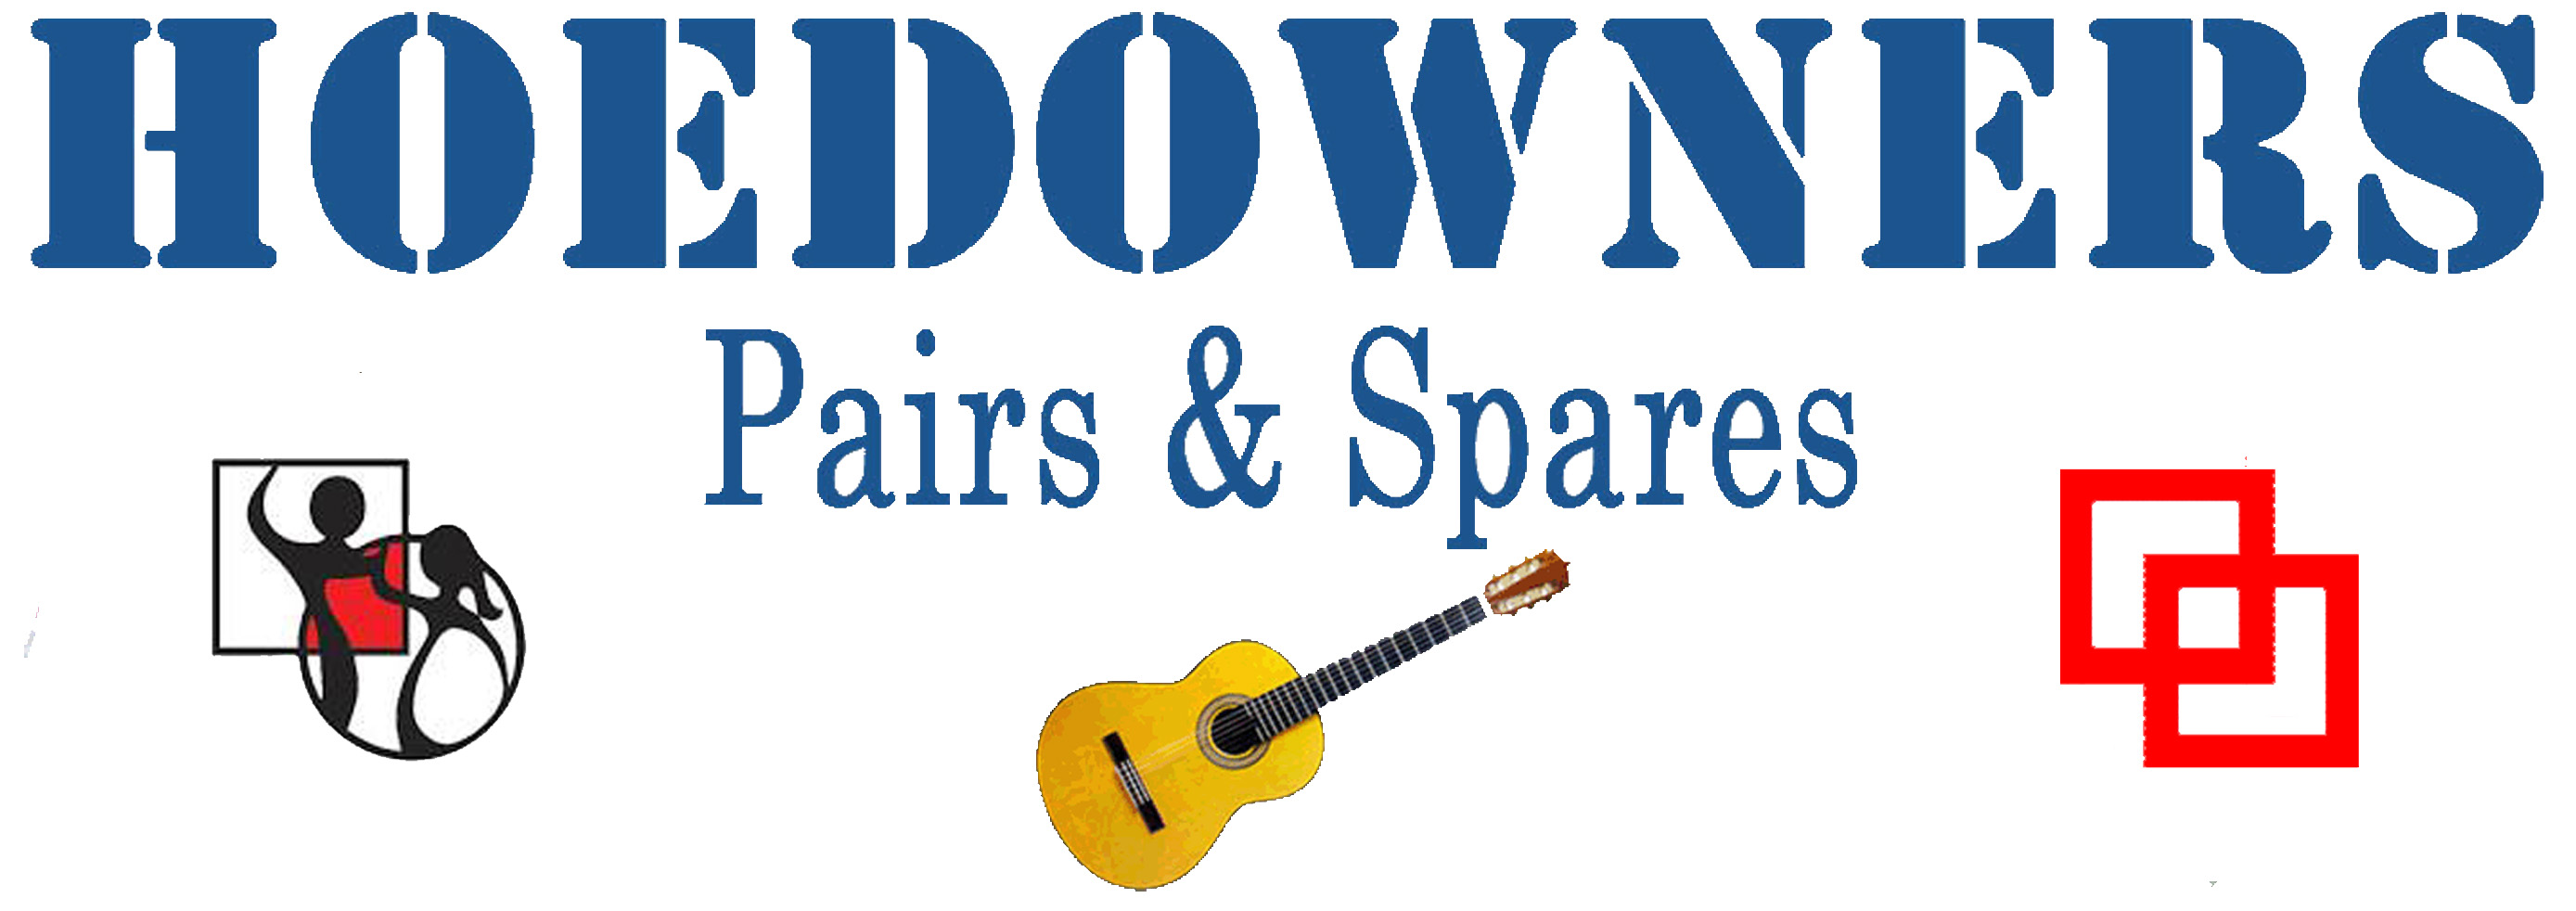 Hoedowners Pairs & Spares Square Dance Club